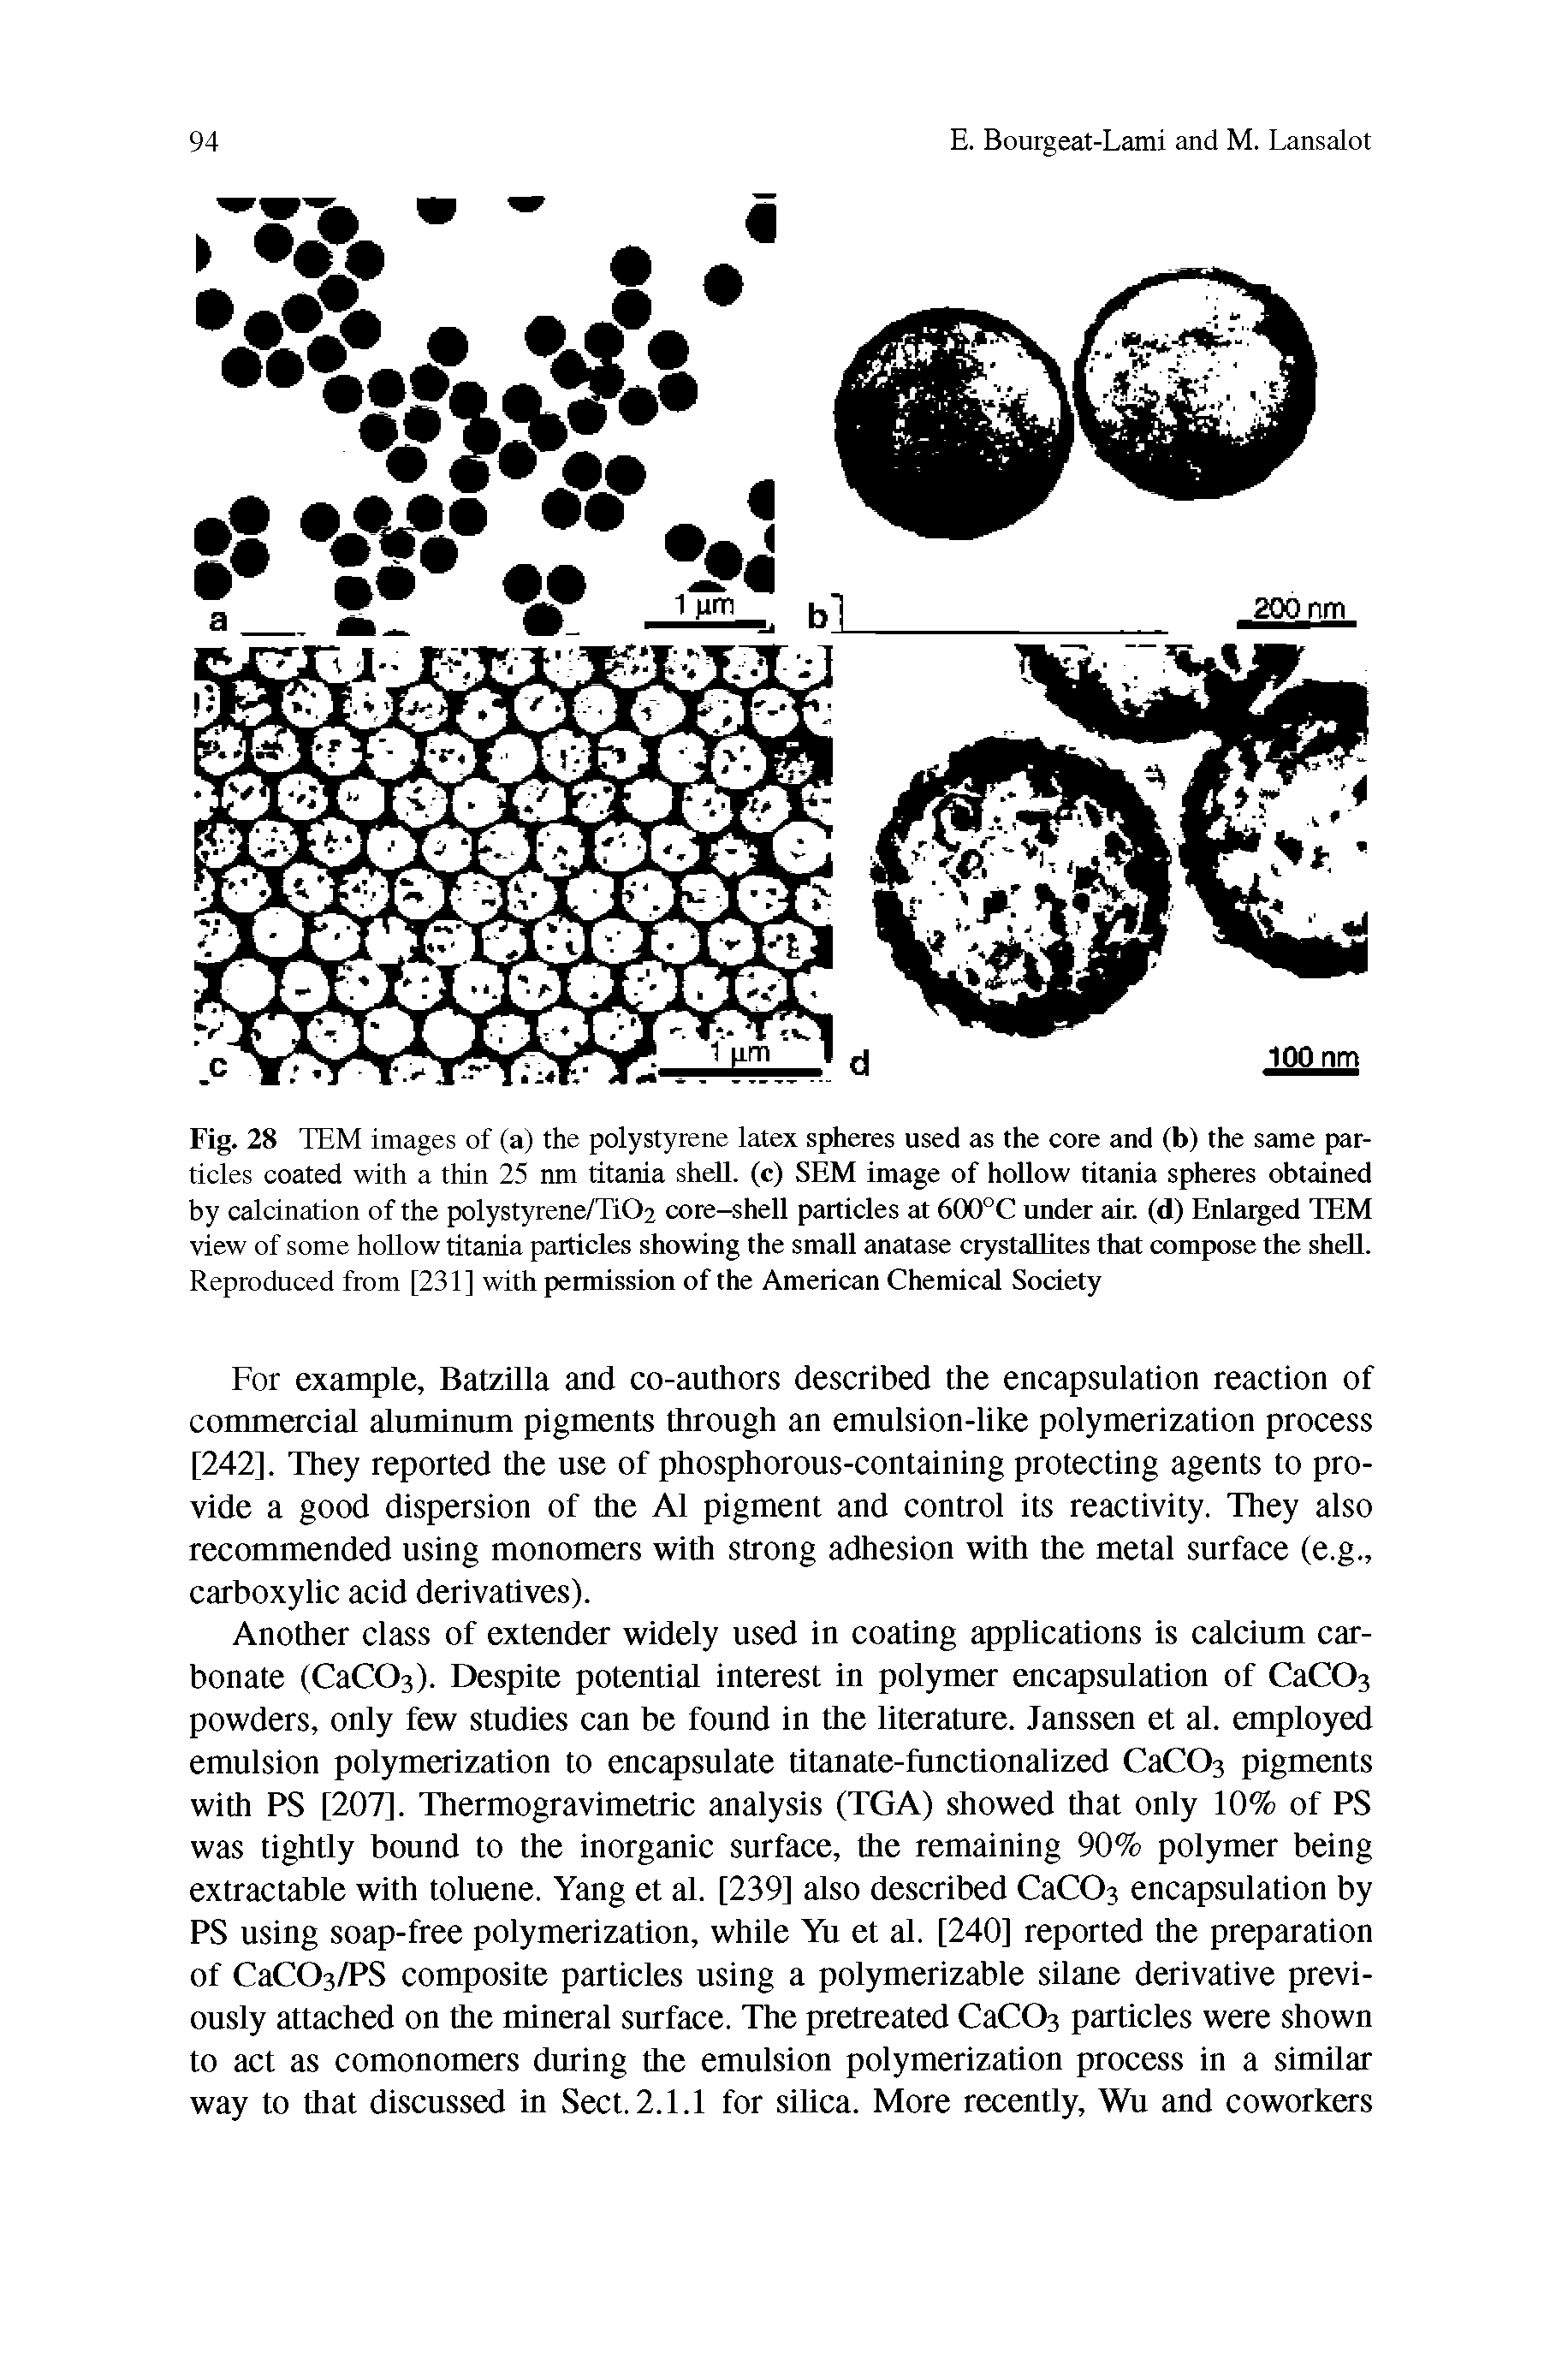 Fig. 28 TEM images of (a) the polystyrene latex spheres used as the core and (b) the same particles coated with a thin 25 nm titania shell, (c) SEM image of hollow titania spheres obtained by calcination of the polystyrene/Ti02 core-shell particles at 600°C under ain (d) Eidaiged TEM view of some hollow titania particles showing the small anatase crystallites that compose the sheU. Reproduced from [231] with permission of the American Chemical Society...